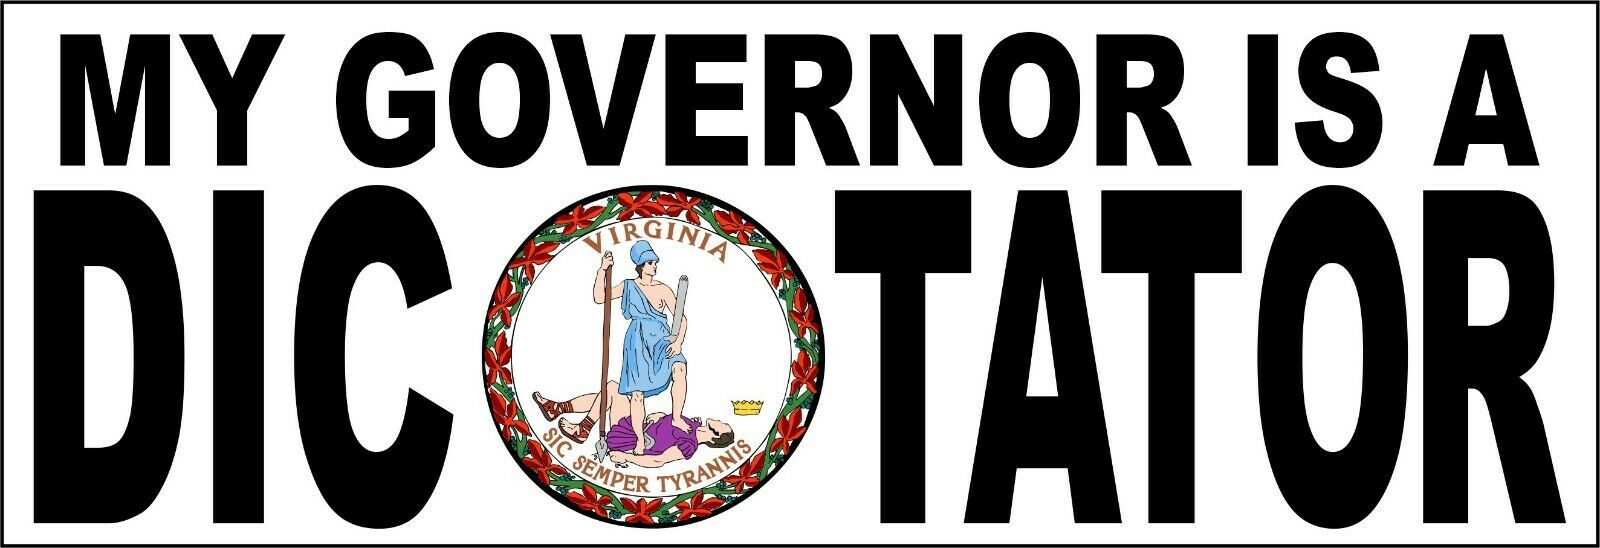 My governor is an dictator bumper sticker - Version 2 Virginia - 8.8" x 3" - Powercall Sirens LLC